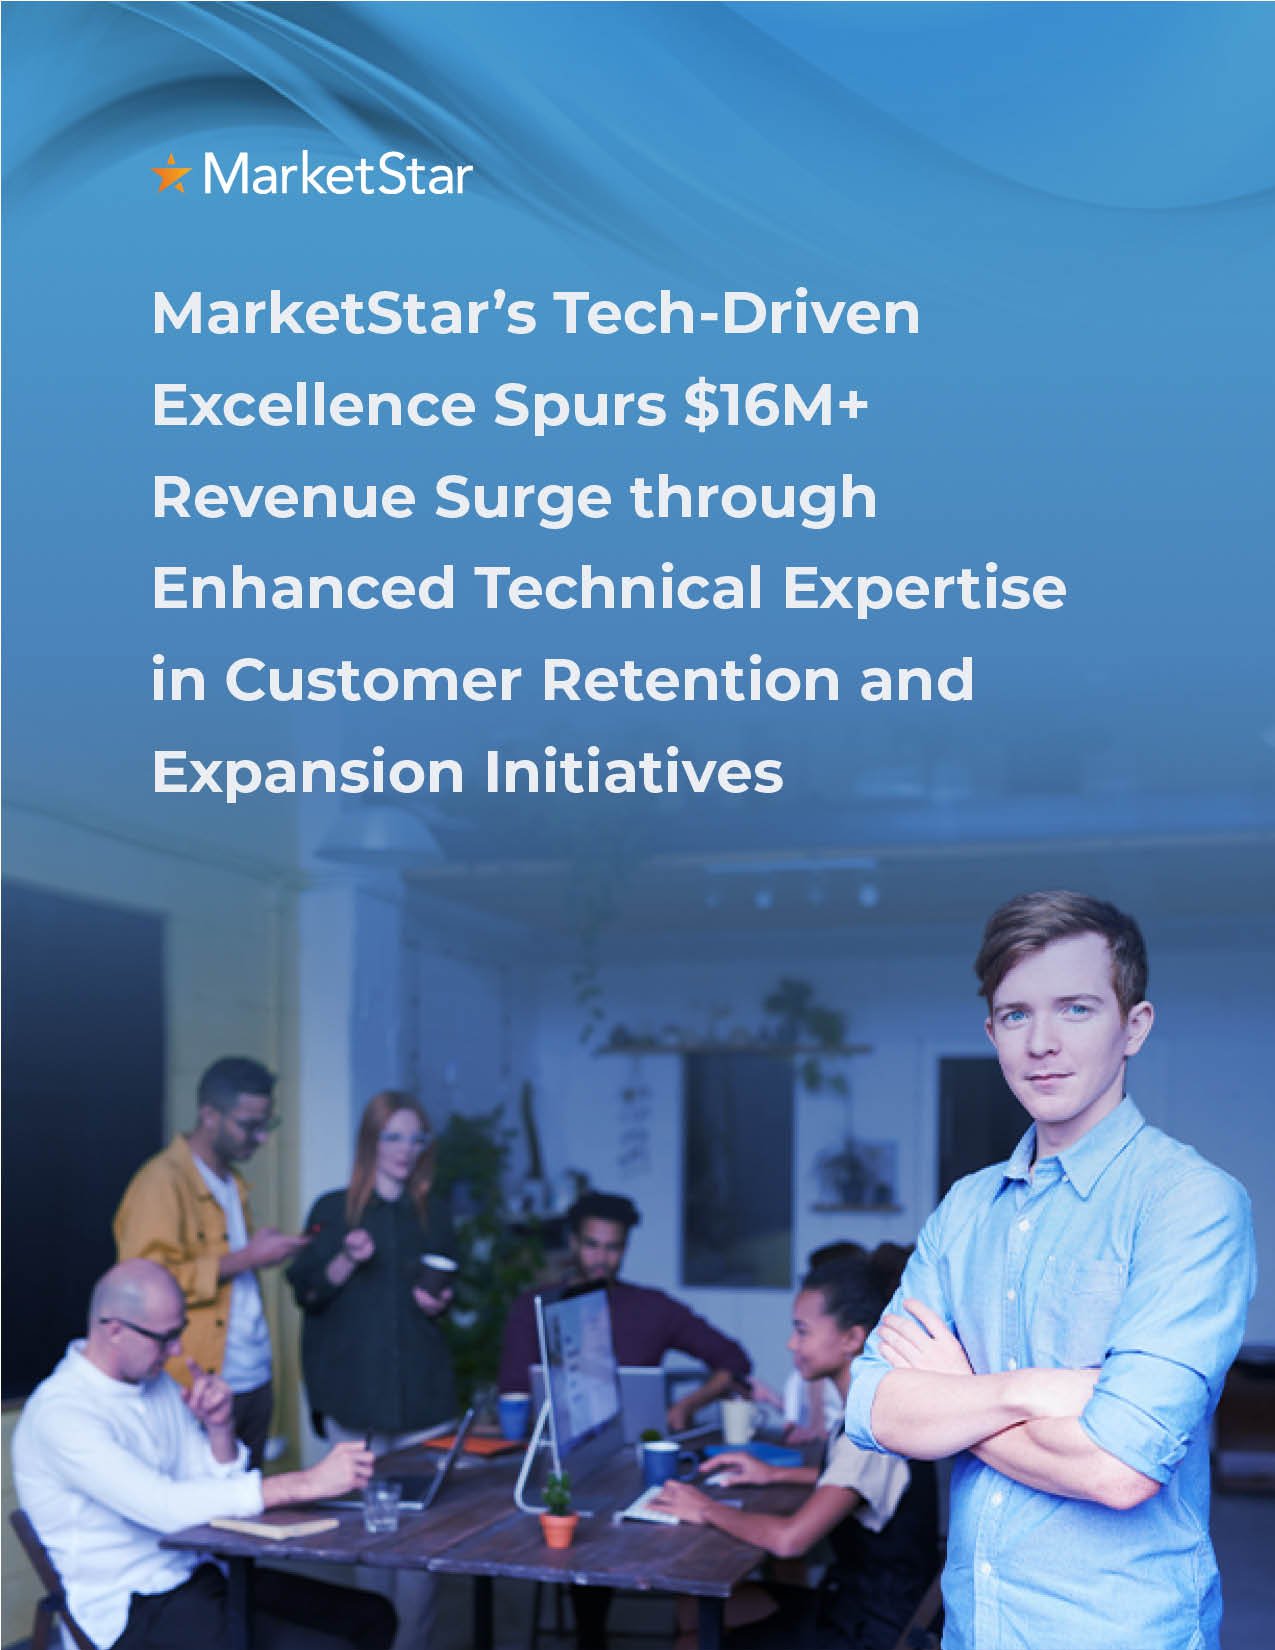 MarketStar’s Tech-Driven Excellence Spurs $16M+ Revenue Surge through Enhanced Technical Expertise in Customer Retention and Expansion Initiatives